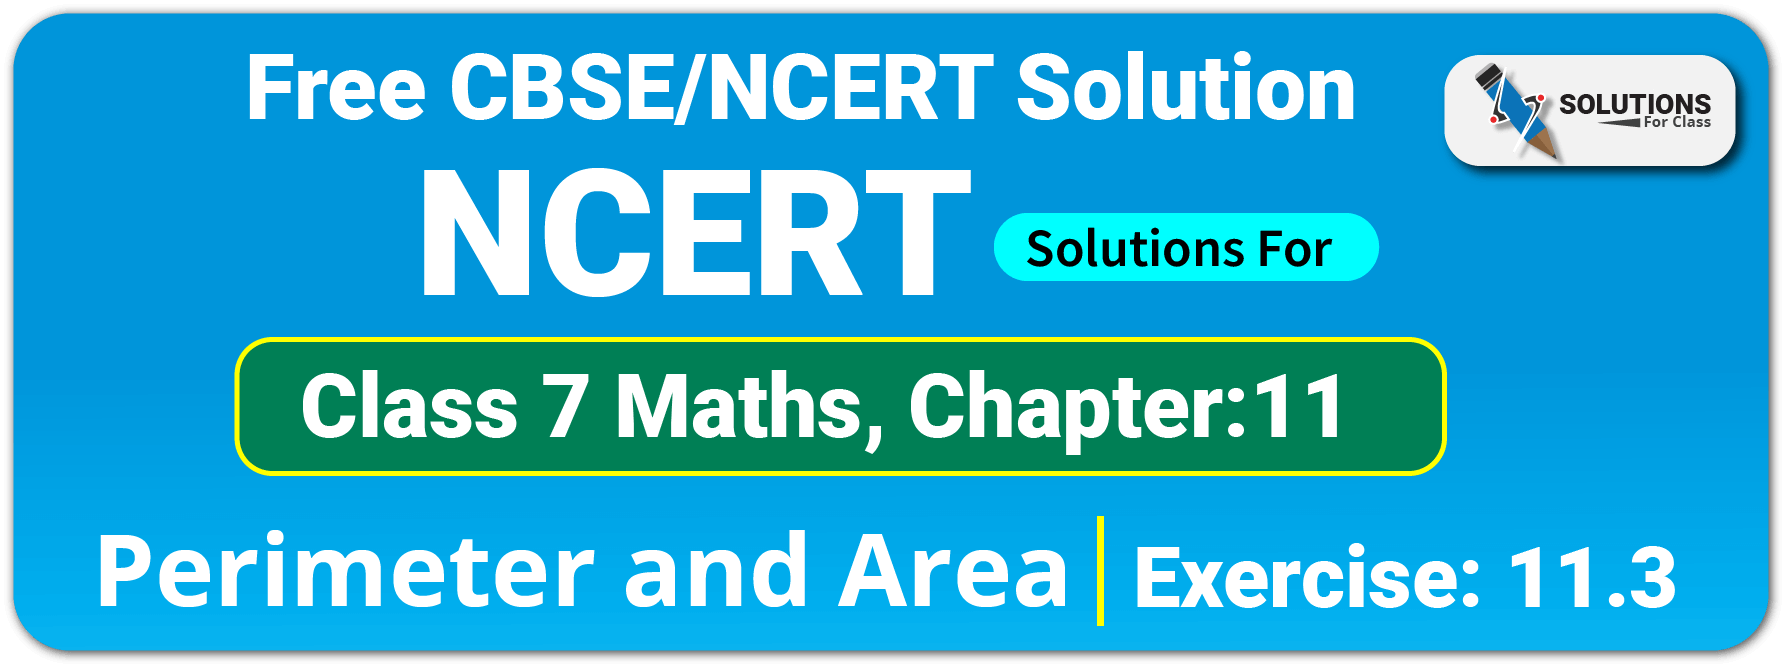 NCERT Solutions For Class 7 Maths Chapter 11 Perimeter and Area Exercise 11.3